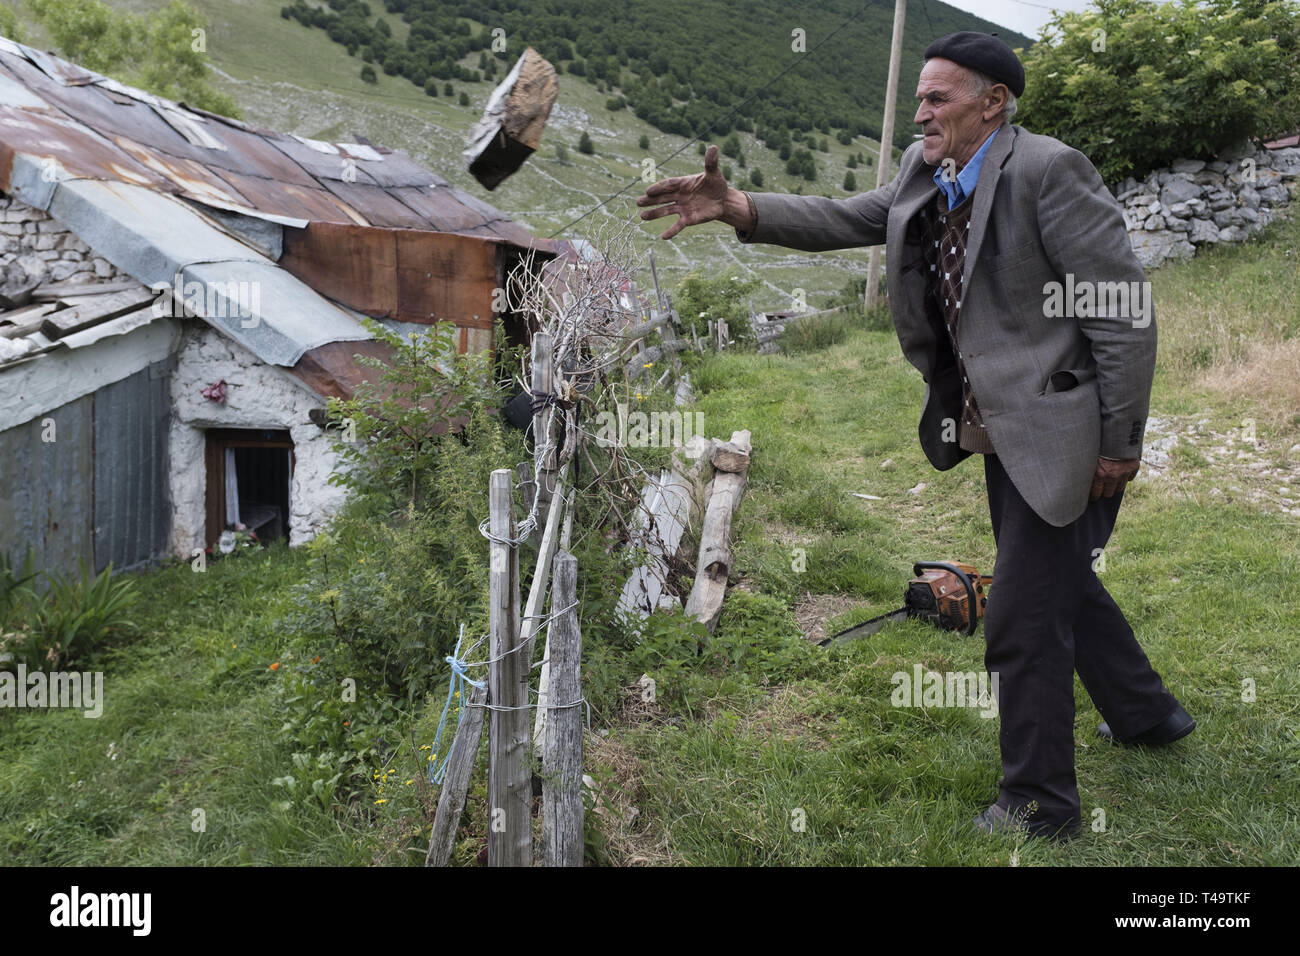 Lukomir, Bosnia. 9th July, 2018. A man throws wood that he just chopped for use in his stove. In the mountains above Sarajevo at about 1500 meters lies Lukomir, the most remote village in all of Bosnia. The village consists mainly of nomadic sheep herder, adn a population of abotu 20 people. Being deemed unstrategic by the Serbs, Lukomir is one of the only areas that remained untouched during the war of the 1990's. The population of the village is slowly disappearing. With children leaving to attend school elsewhere and not coming back, what is the future of this village? After this curre Stock Photo